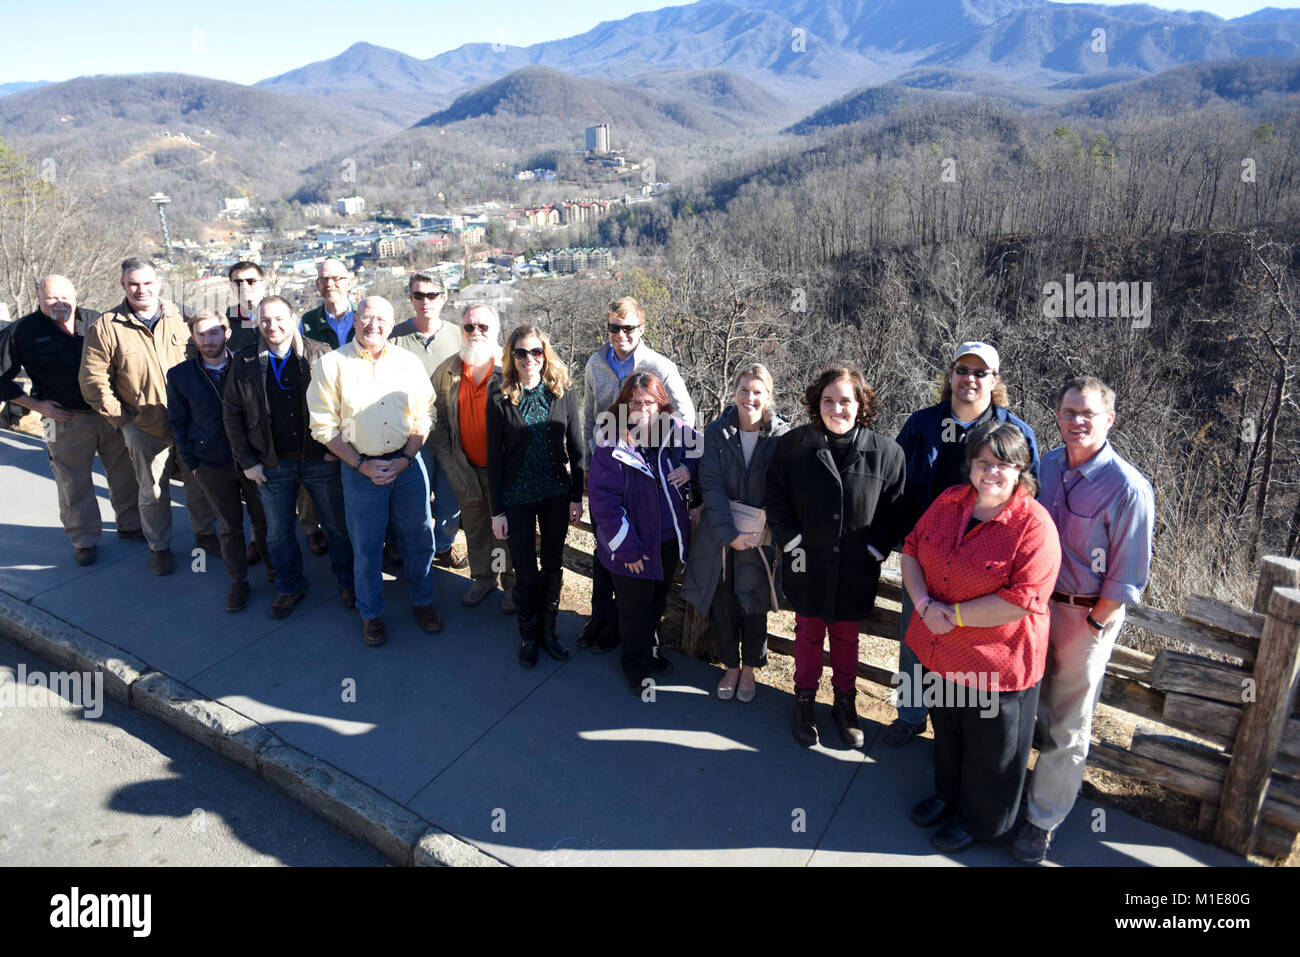 Members of Tennessee Silver Jackets pose at the Gatlinburg Bypass Overlook overlooking Gatlinburg, Tenn., Jan. 25, 2018.  The team toured the area and received a briefing on the wildfires that moved through Sevier County and city of Gatlinburg in November 2016. Silver Jackets is an innovative partnership where local, state and federal agencies facilitate flood risk reduction, coordinates programs, promotes cohesive solutions, synchronizes plans and policies, and ultimately provides integrated solutions. (USACE Stock Photo